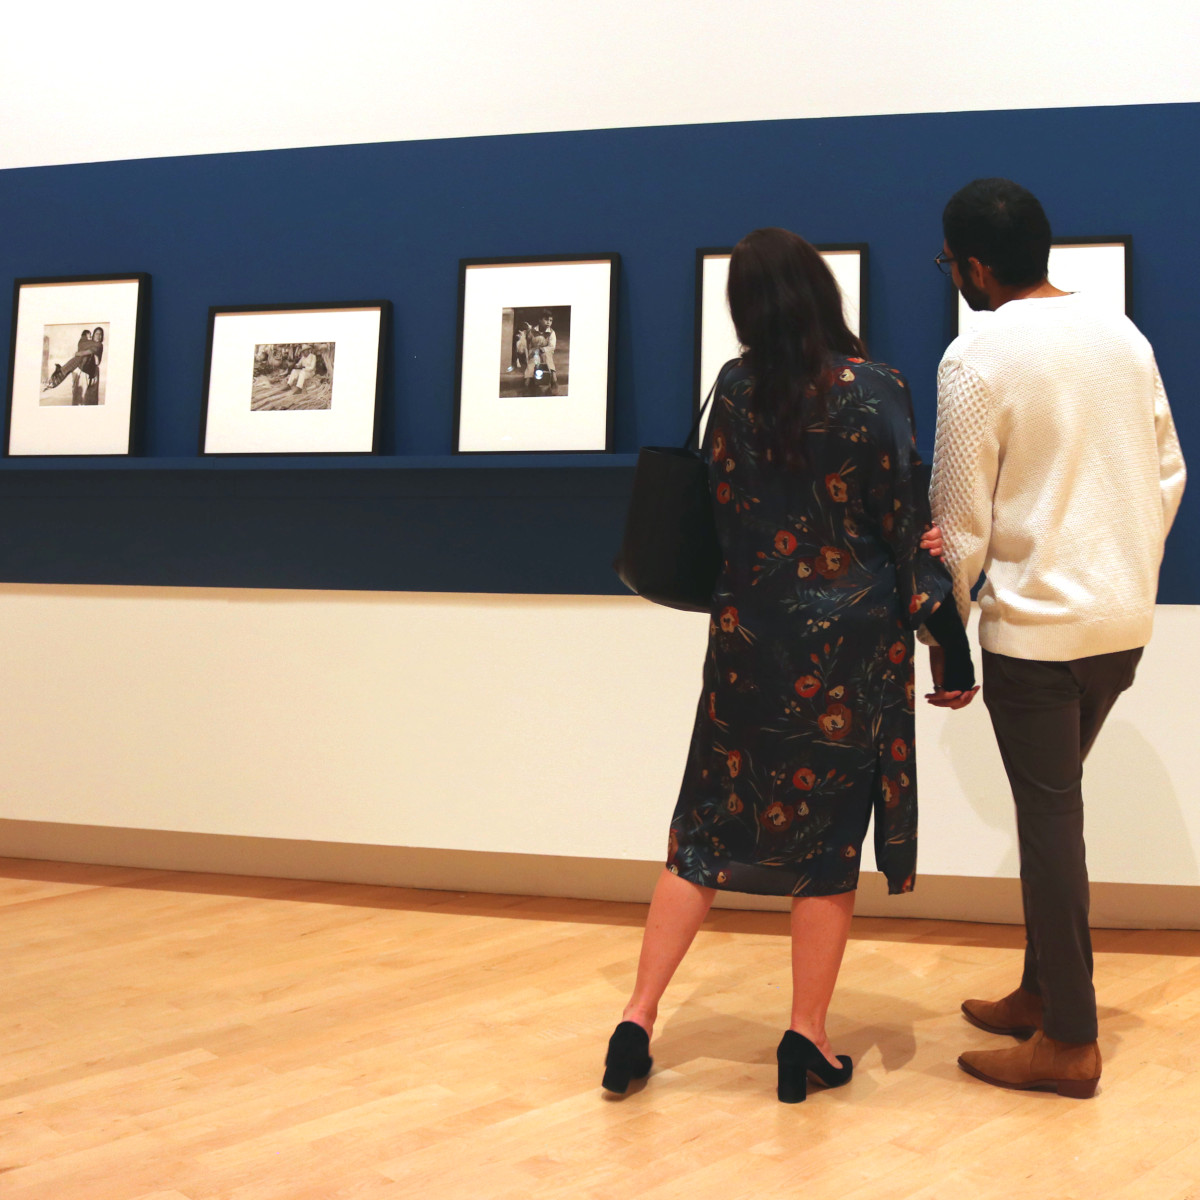 Tacoma Art Museum is a proud partner in Bank of America’s Museums on Us® program. Visit this weekend to participate and see Luces y Sombras! Present your active Bank of America credit or debit card with photo ID to gain one free general admission ticket.